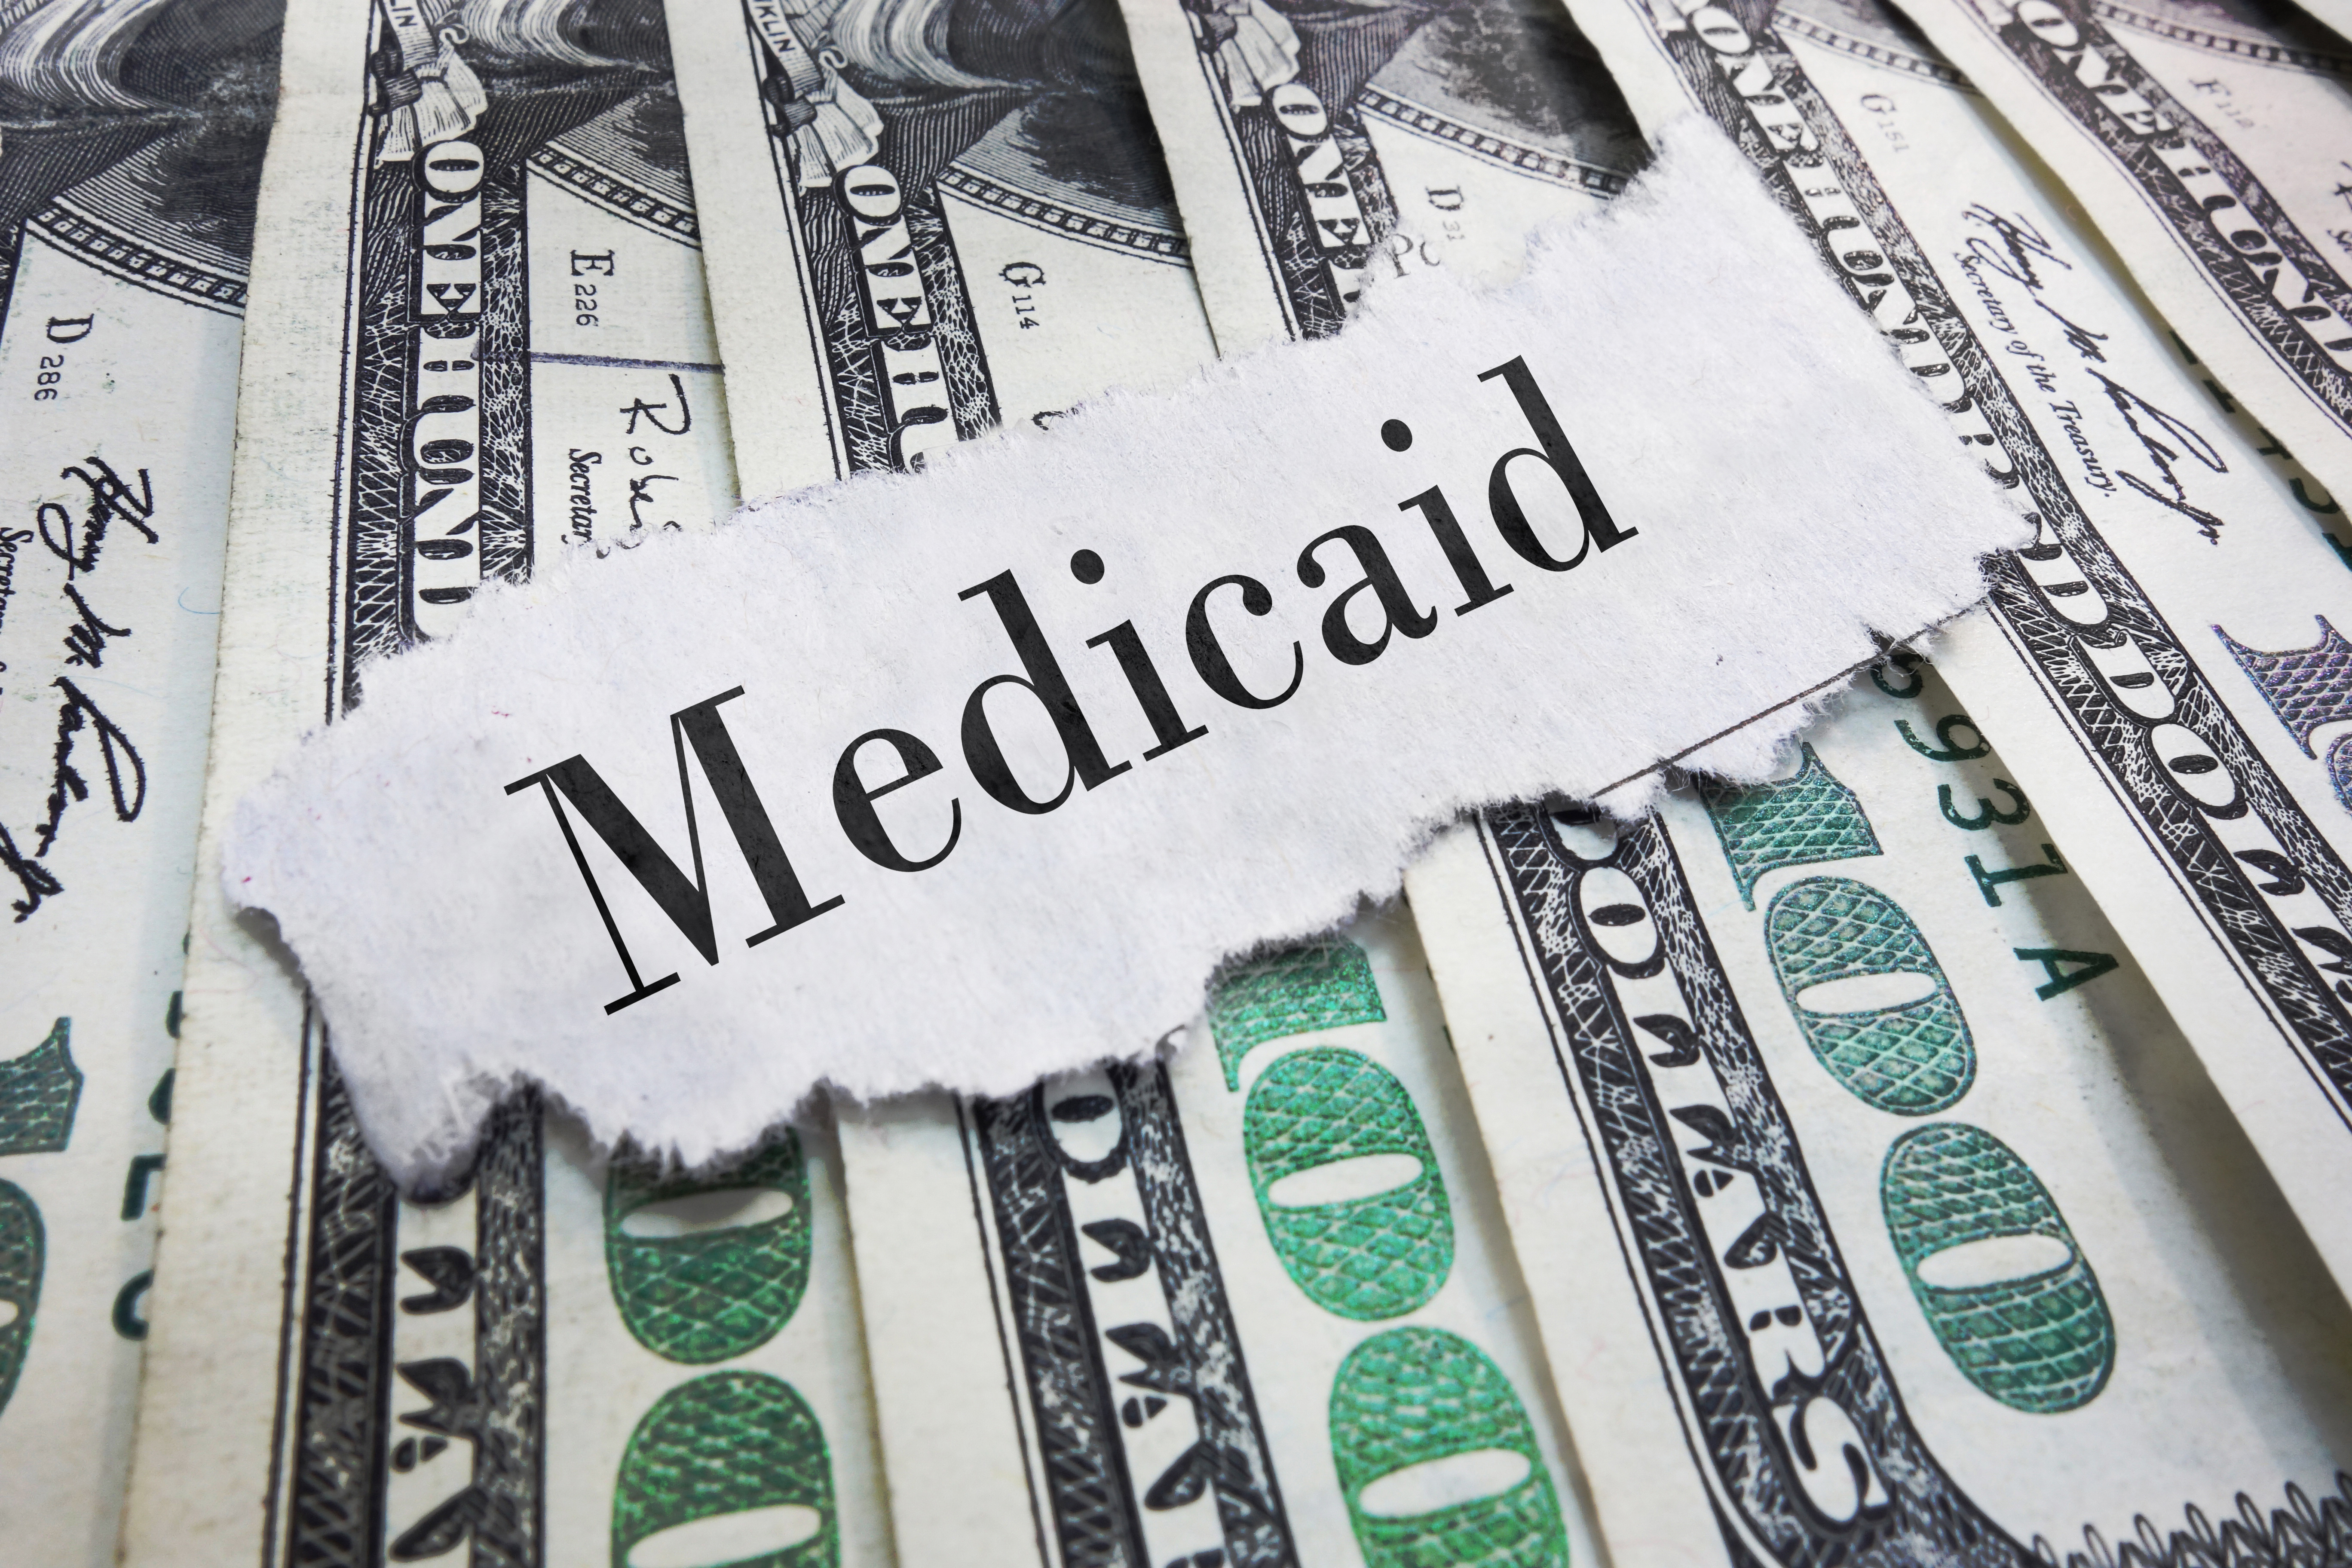 Personal care service workers arrested for defrauding Medicaid program